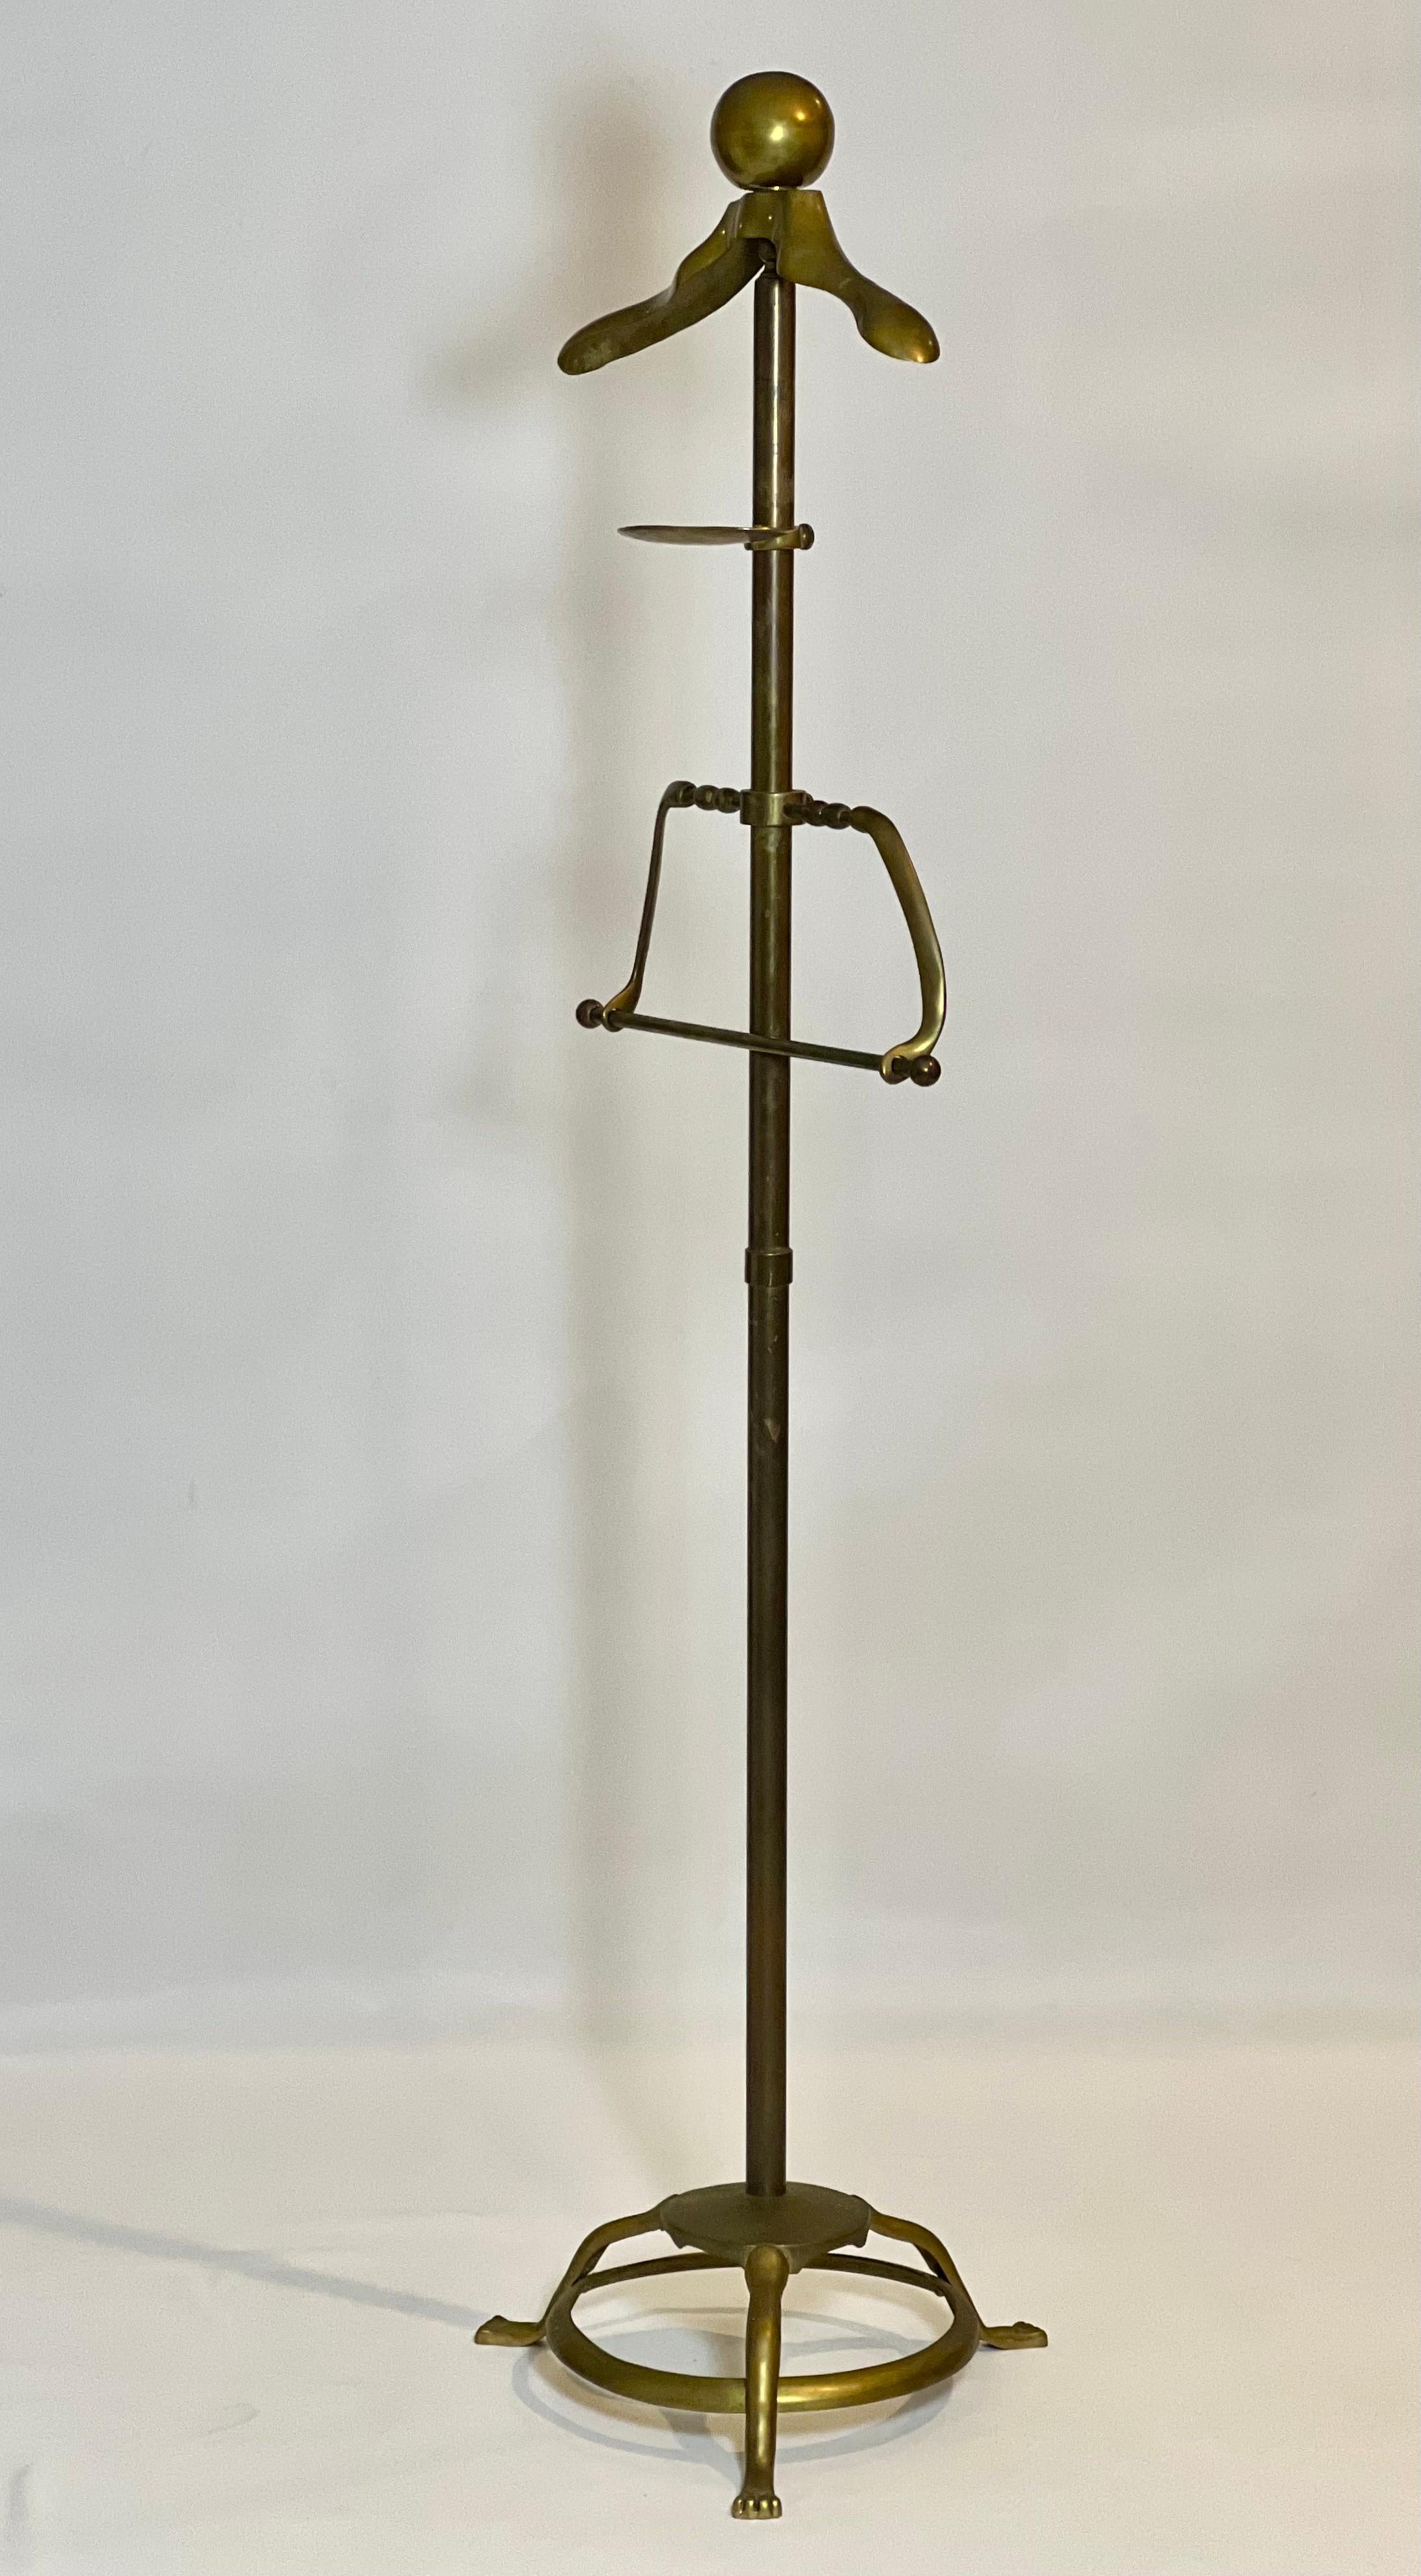 Italian Art Deco Solid Brass Valet Stand, 1960s For Sale